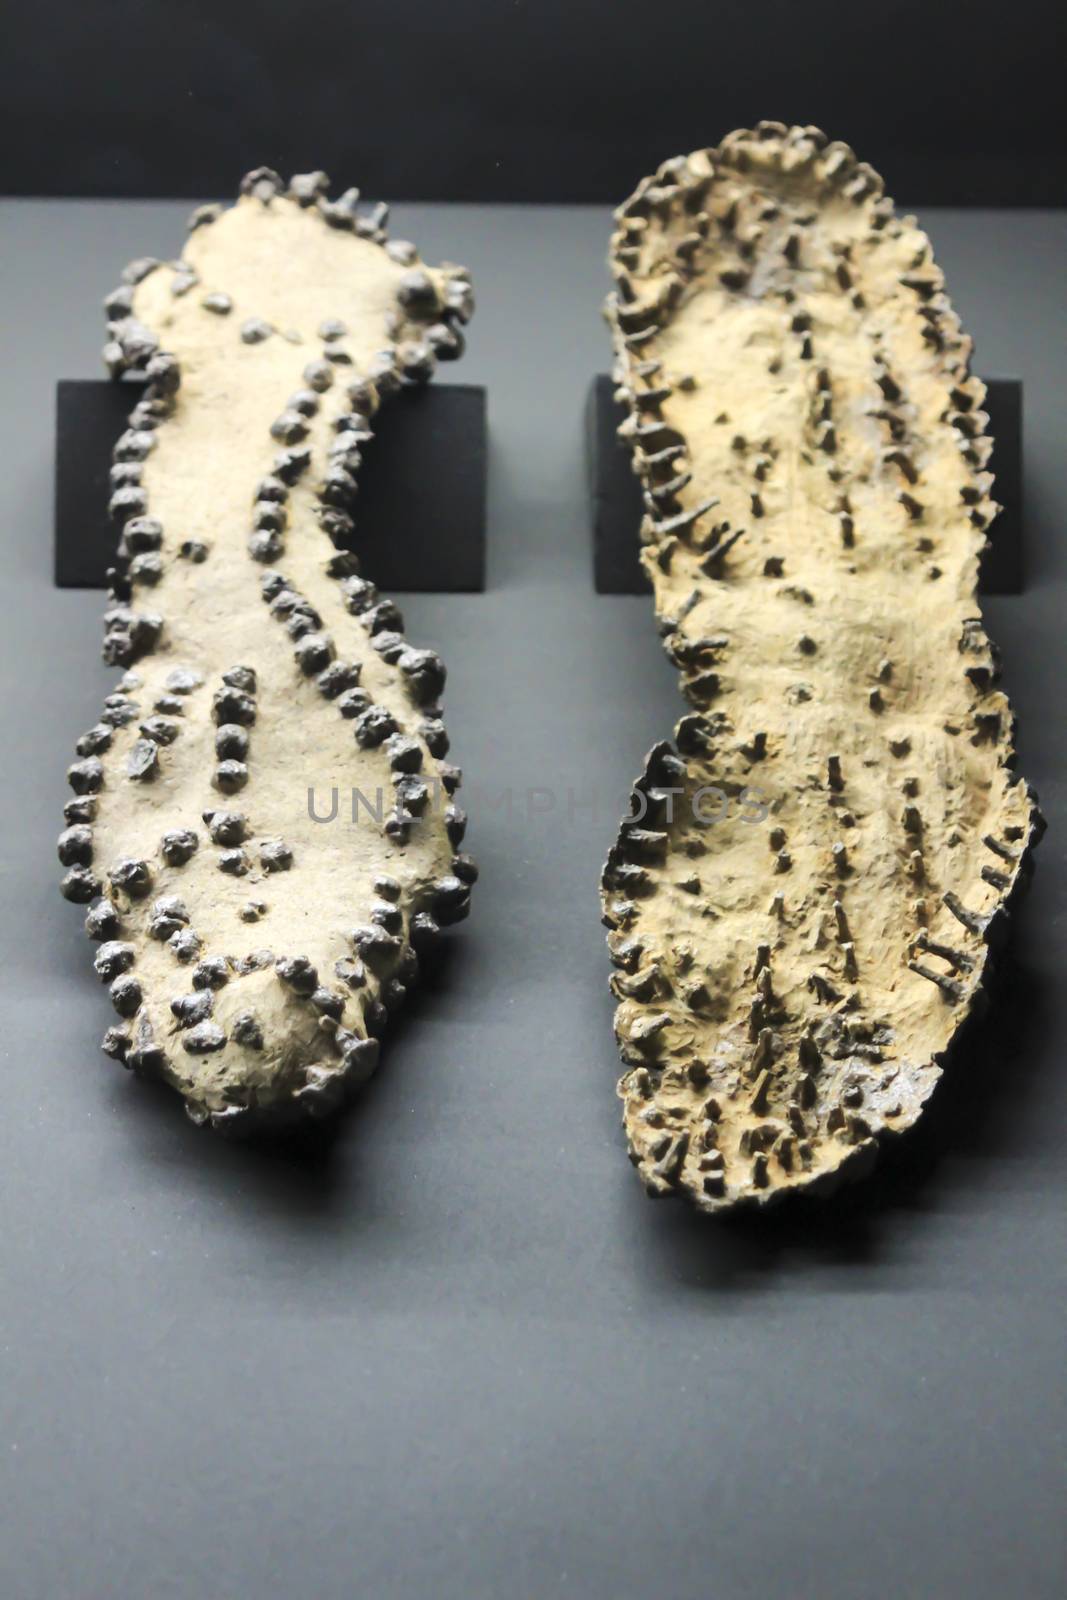 Alicante, Spain- October 8, 2020: Pair of Roman sandal soles of the 4th century found at the Albir necropolis and exhibited at the Archaeological Museum of Alicante